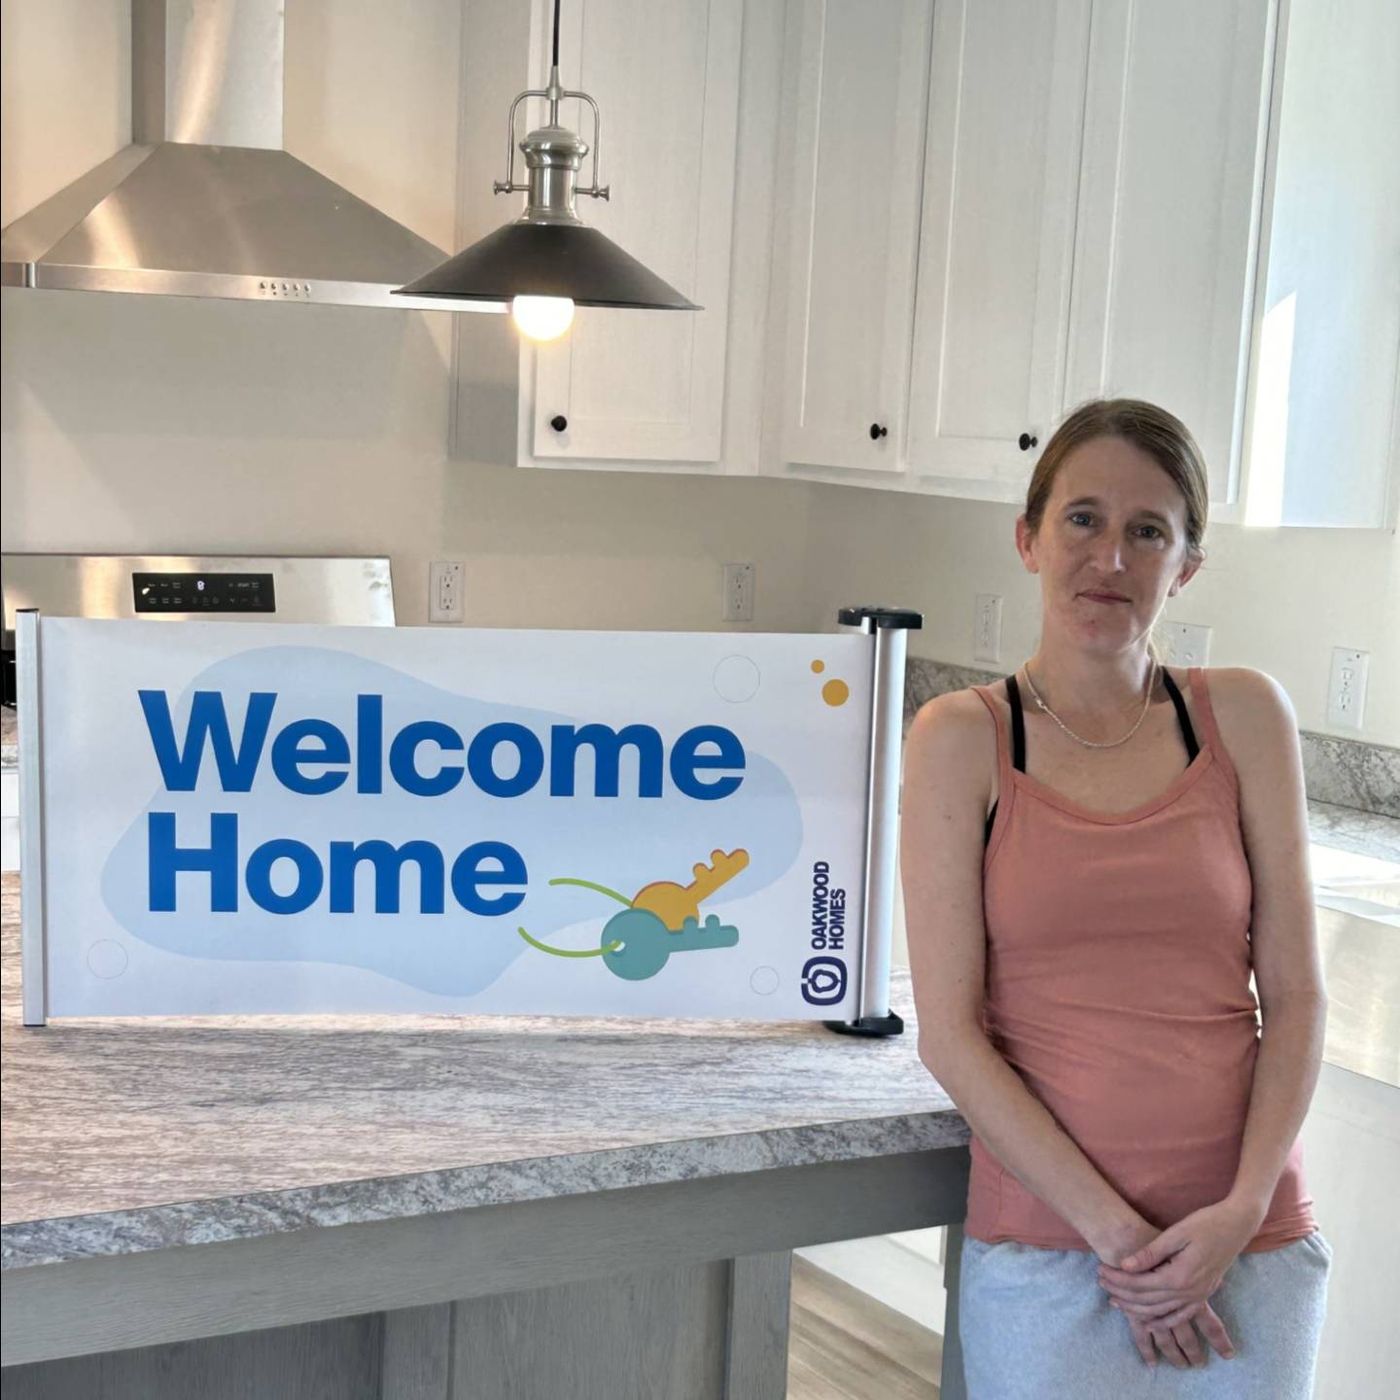 April A. welcome home image